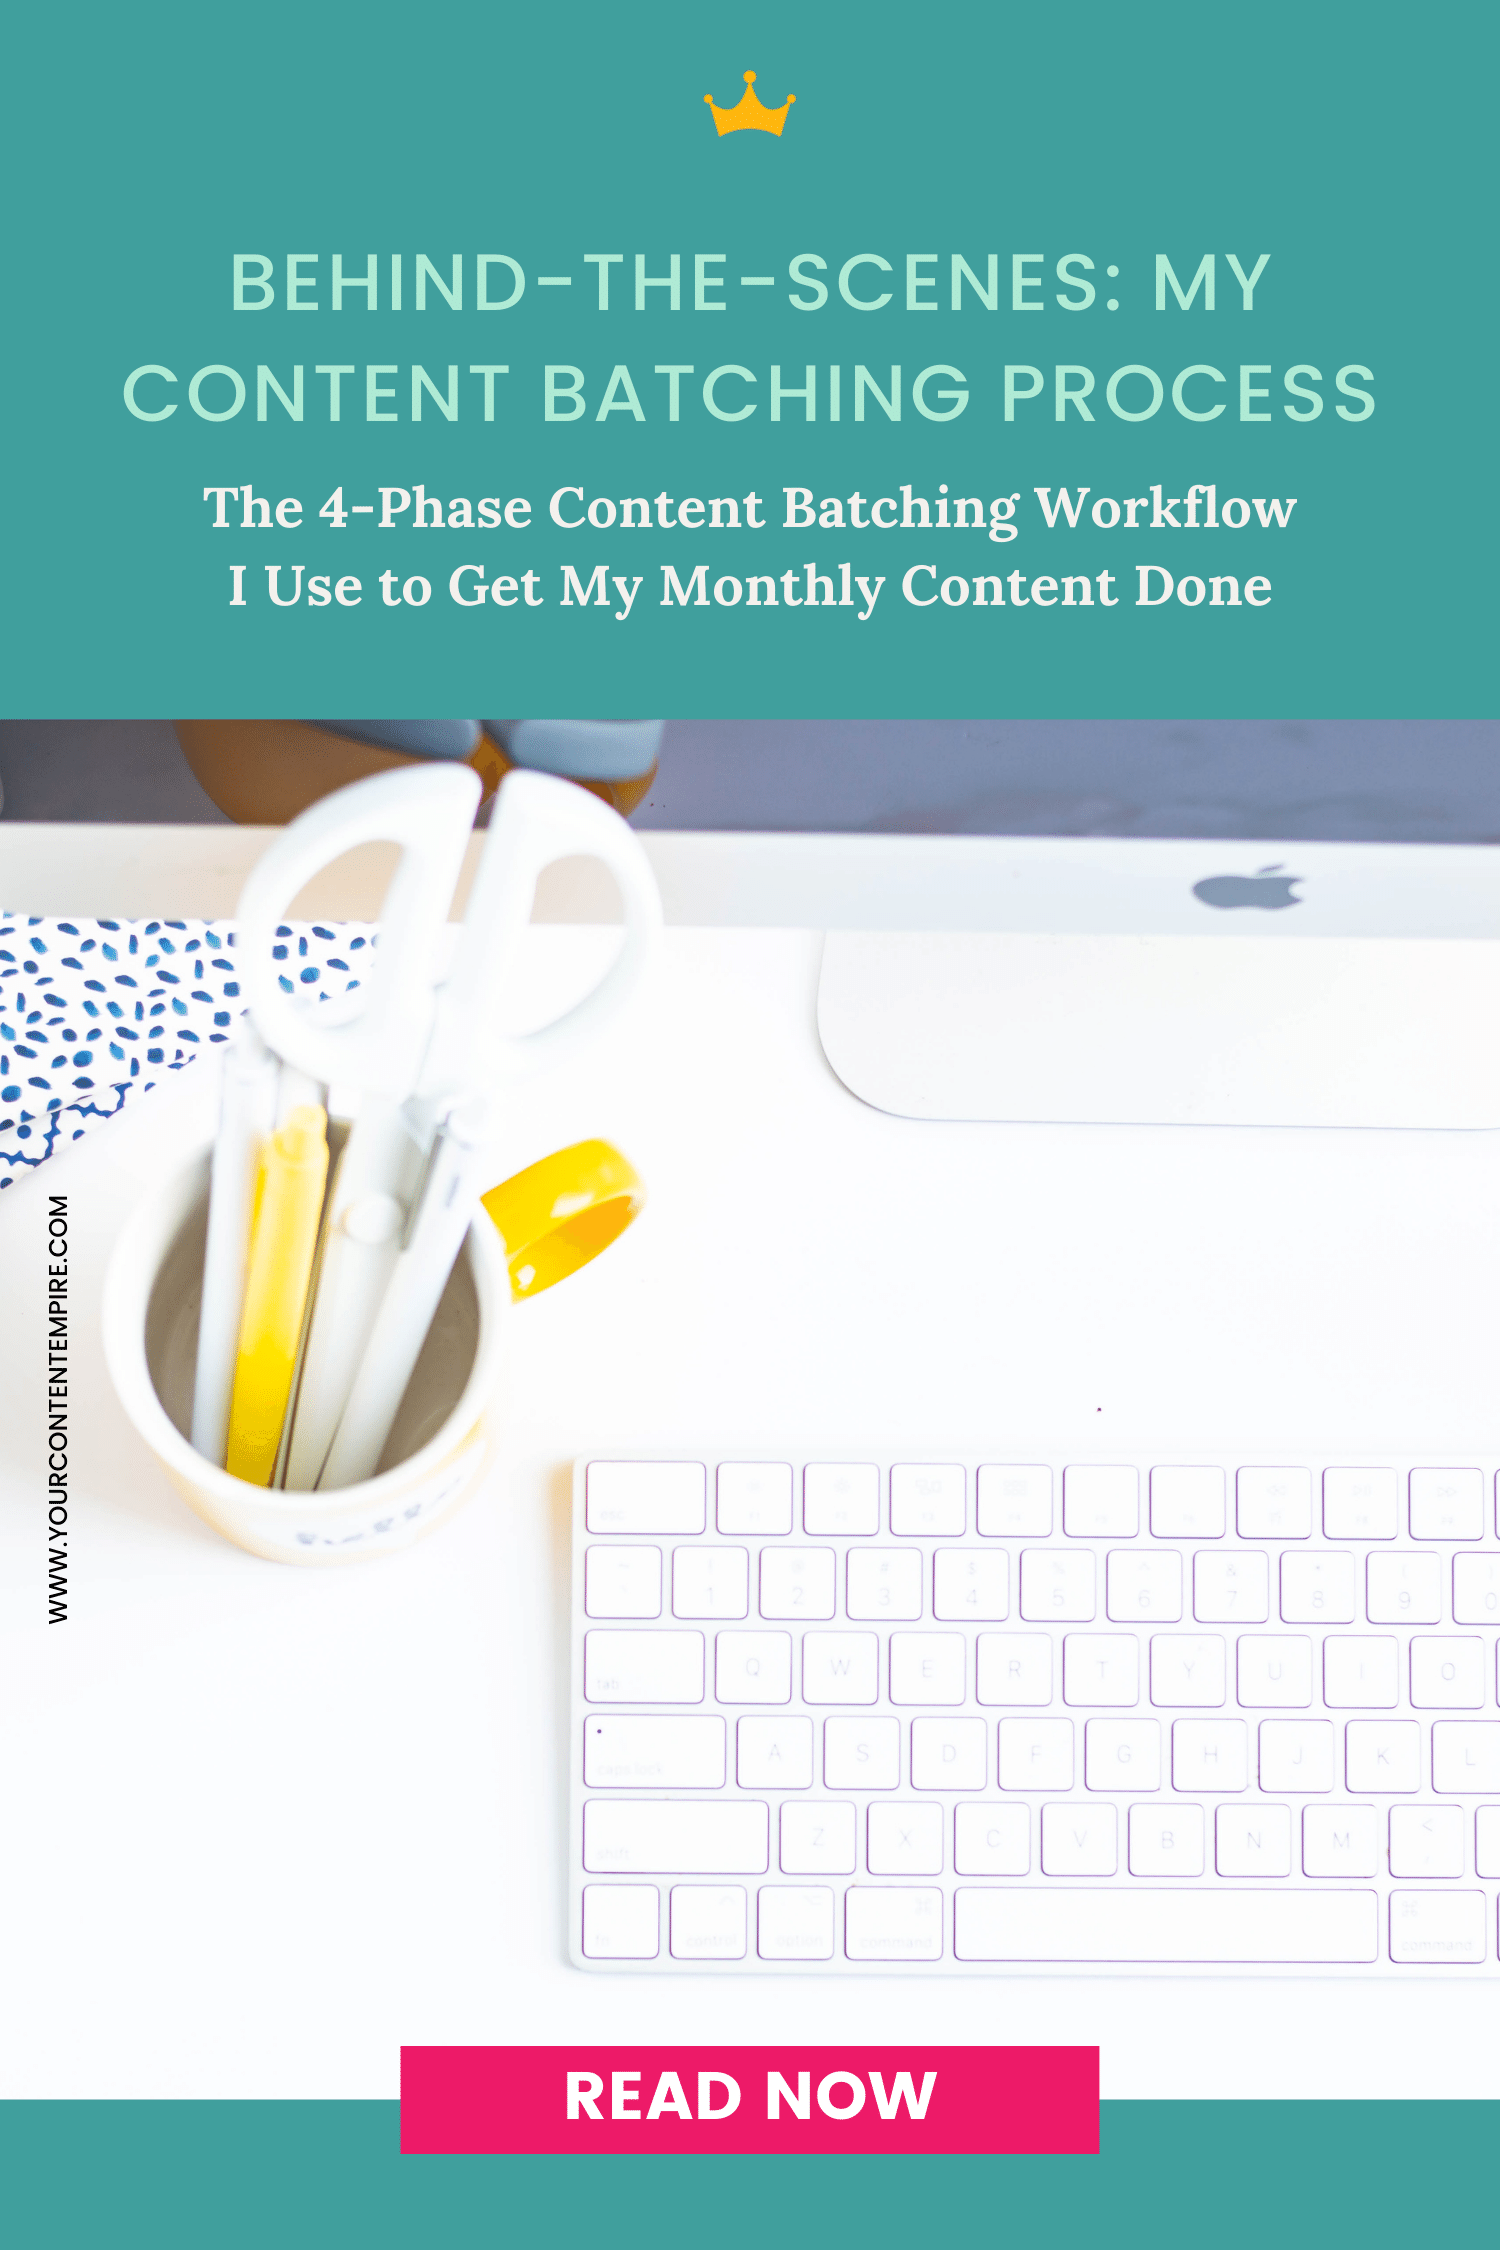 Behind-the-Scenes: My Content Batching Process